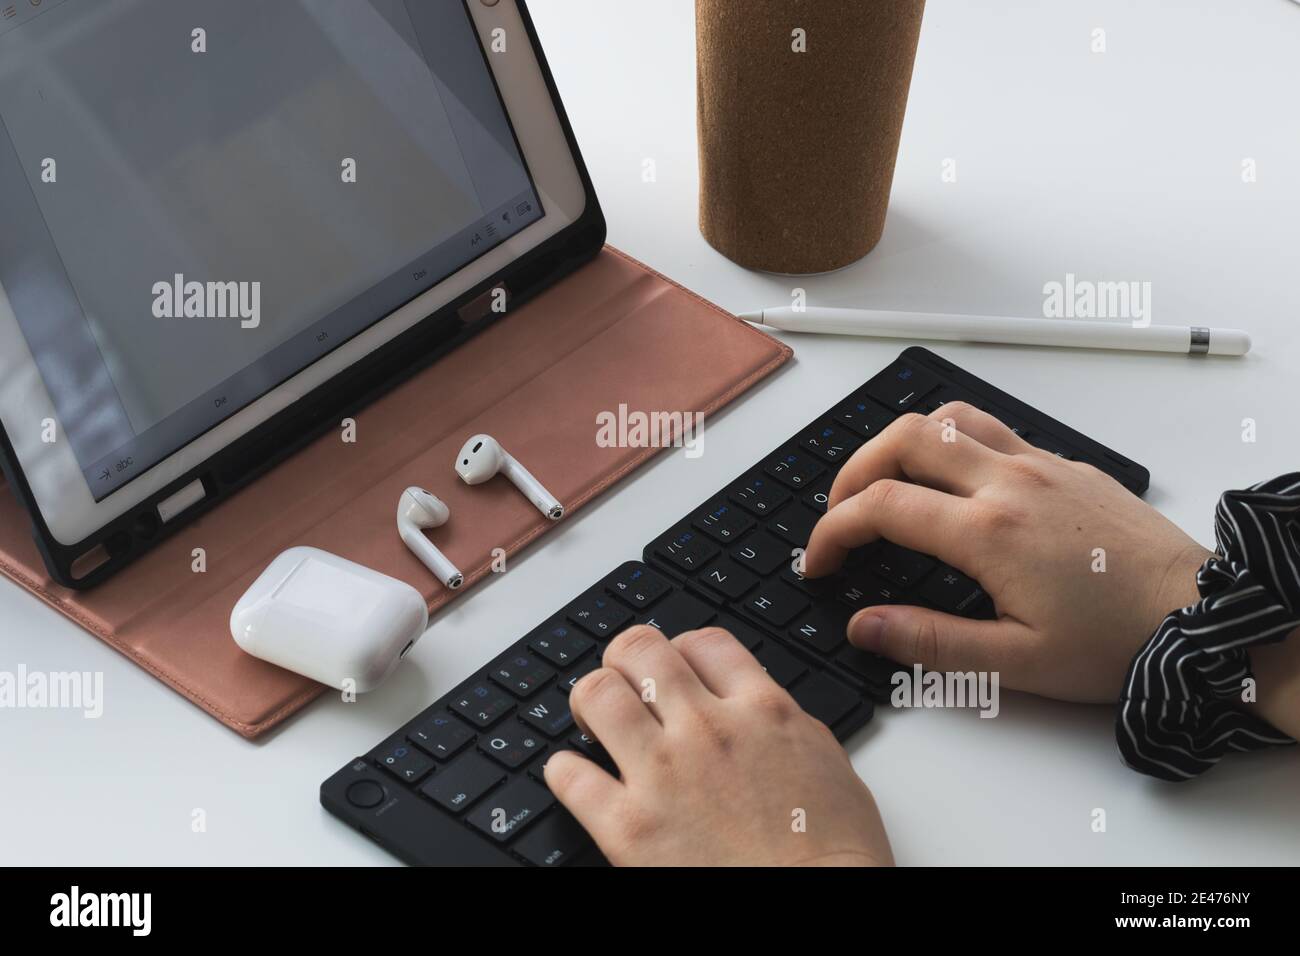 woman typing on a black bluetooth keyboard, working home office at a tablet computer Stock Photo